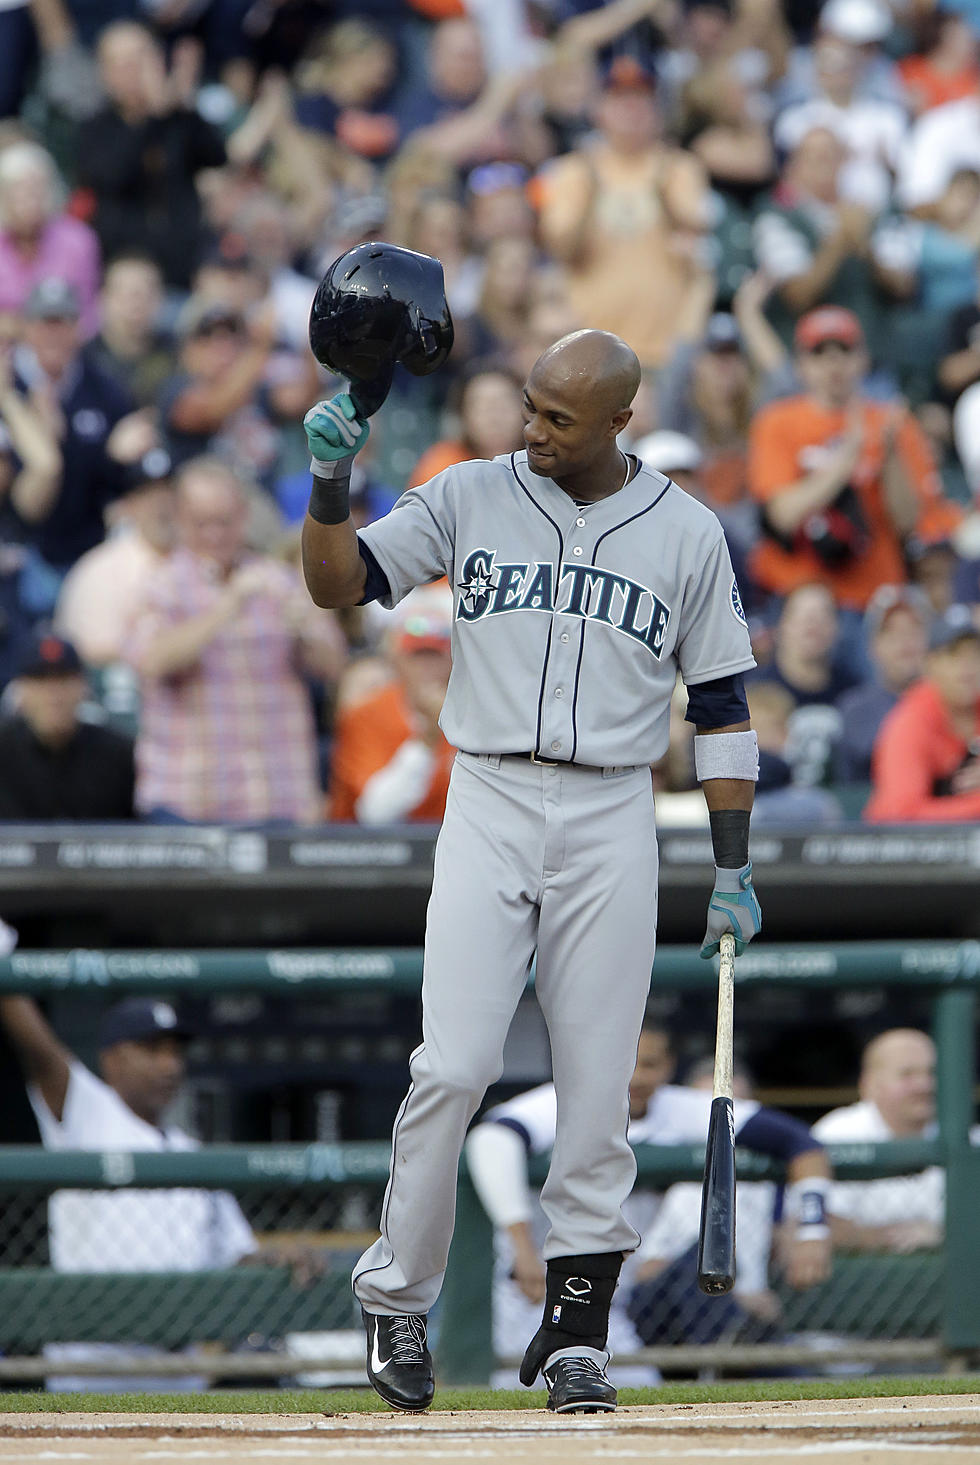 Mariners Take Down the Tigers, 7-2